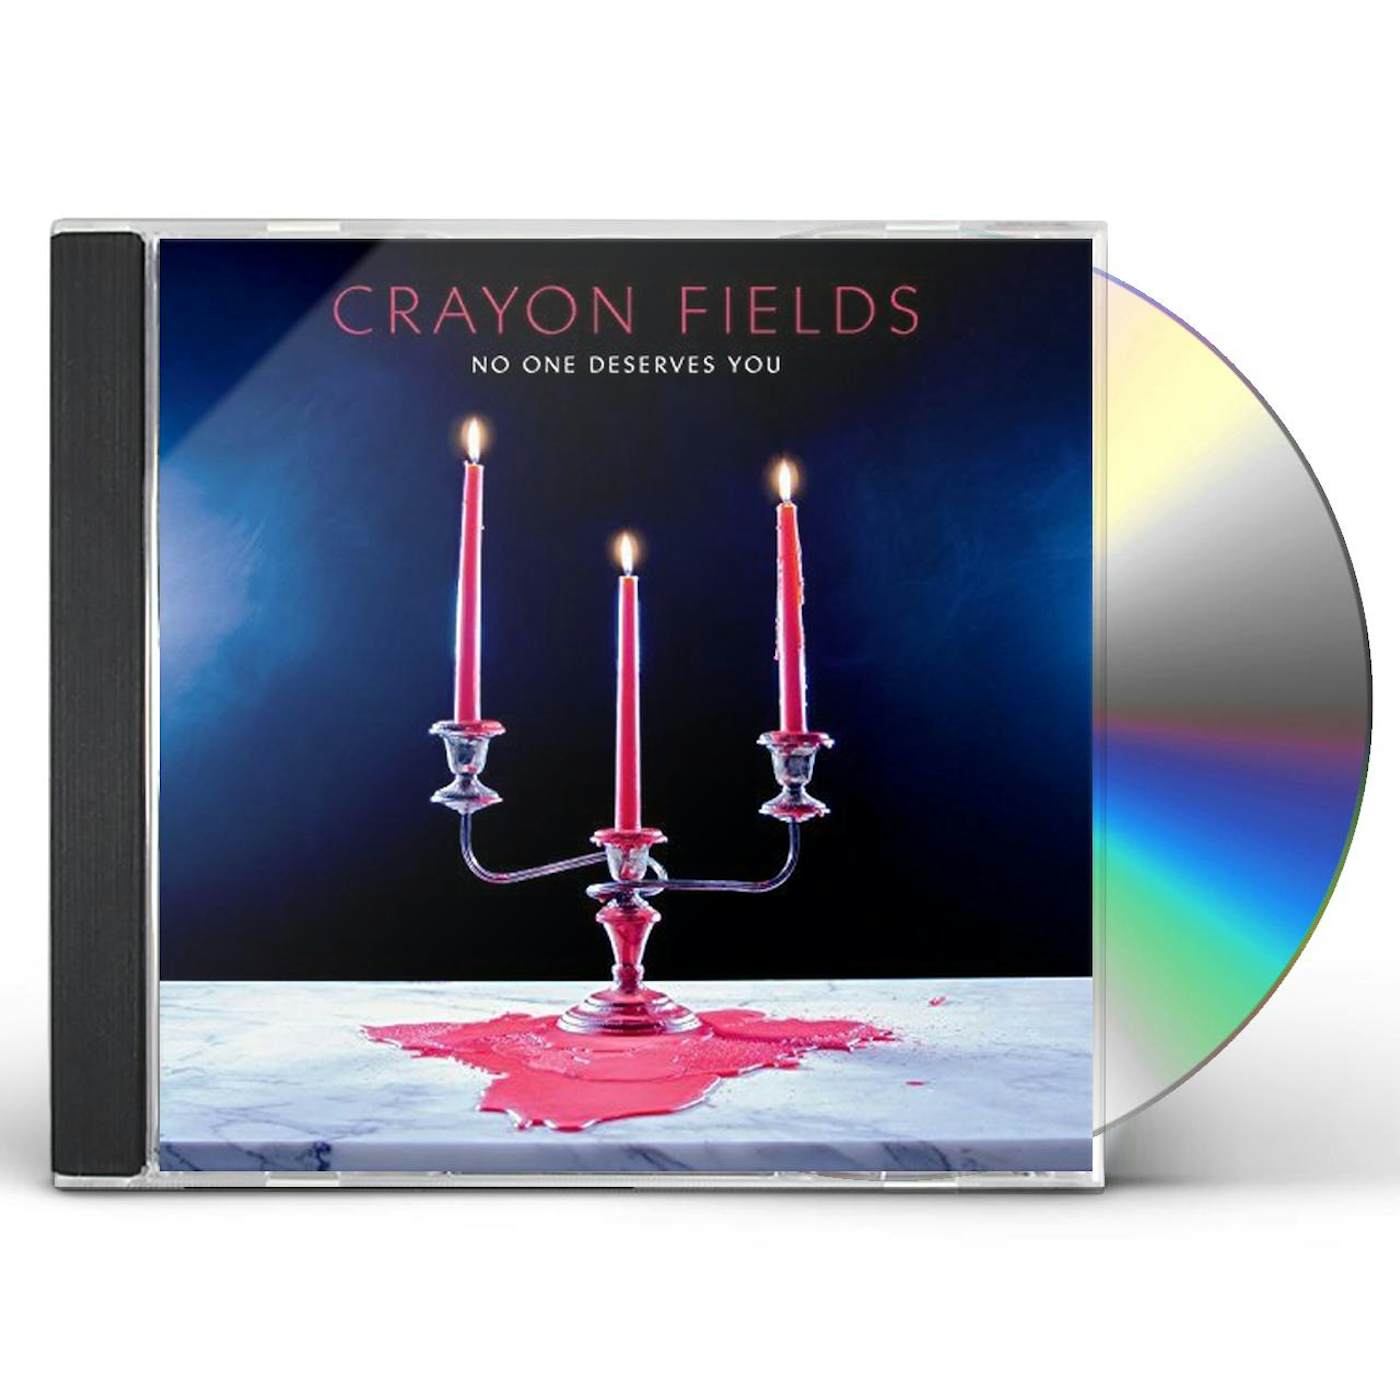 The Crayon Fields NO ONE DESERVES YOU CD